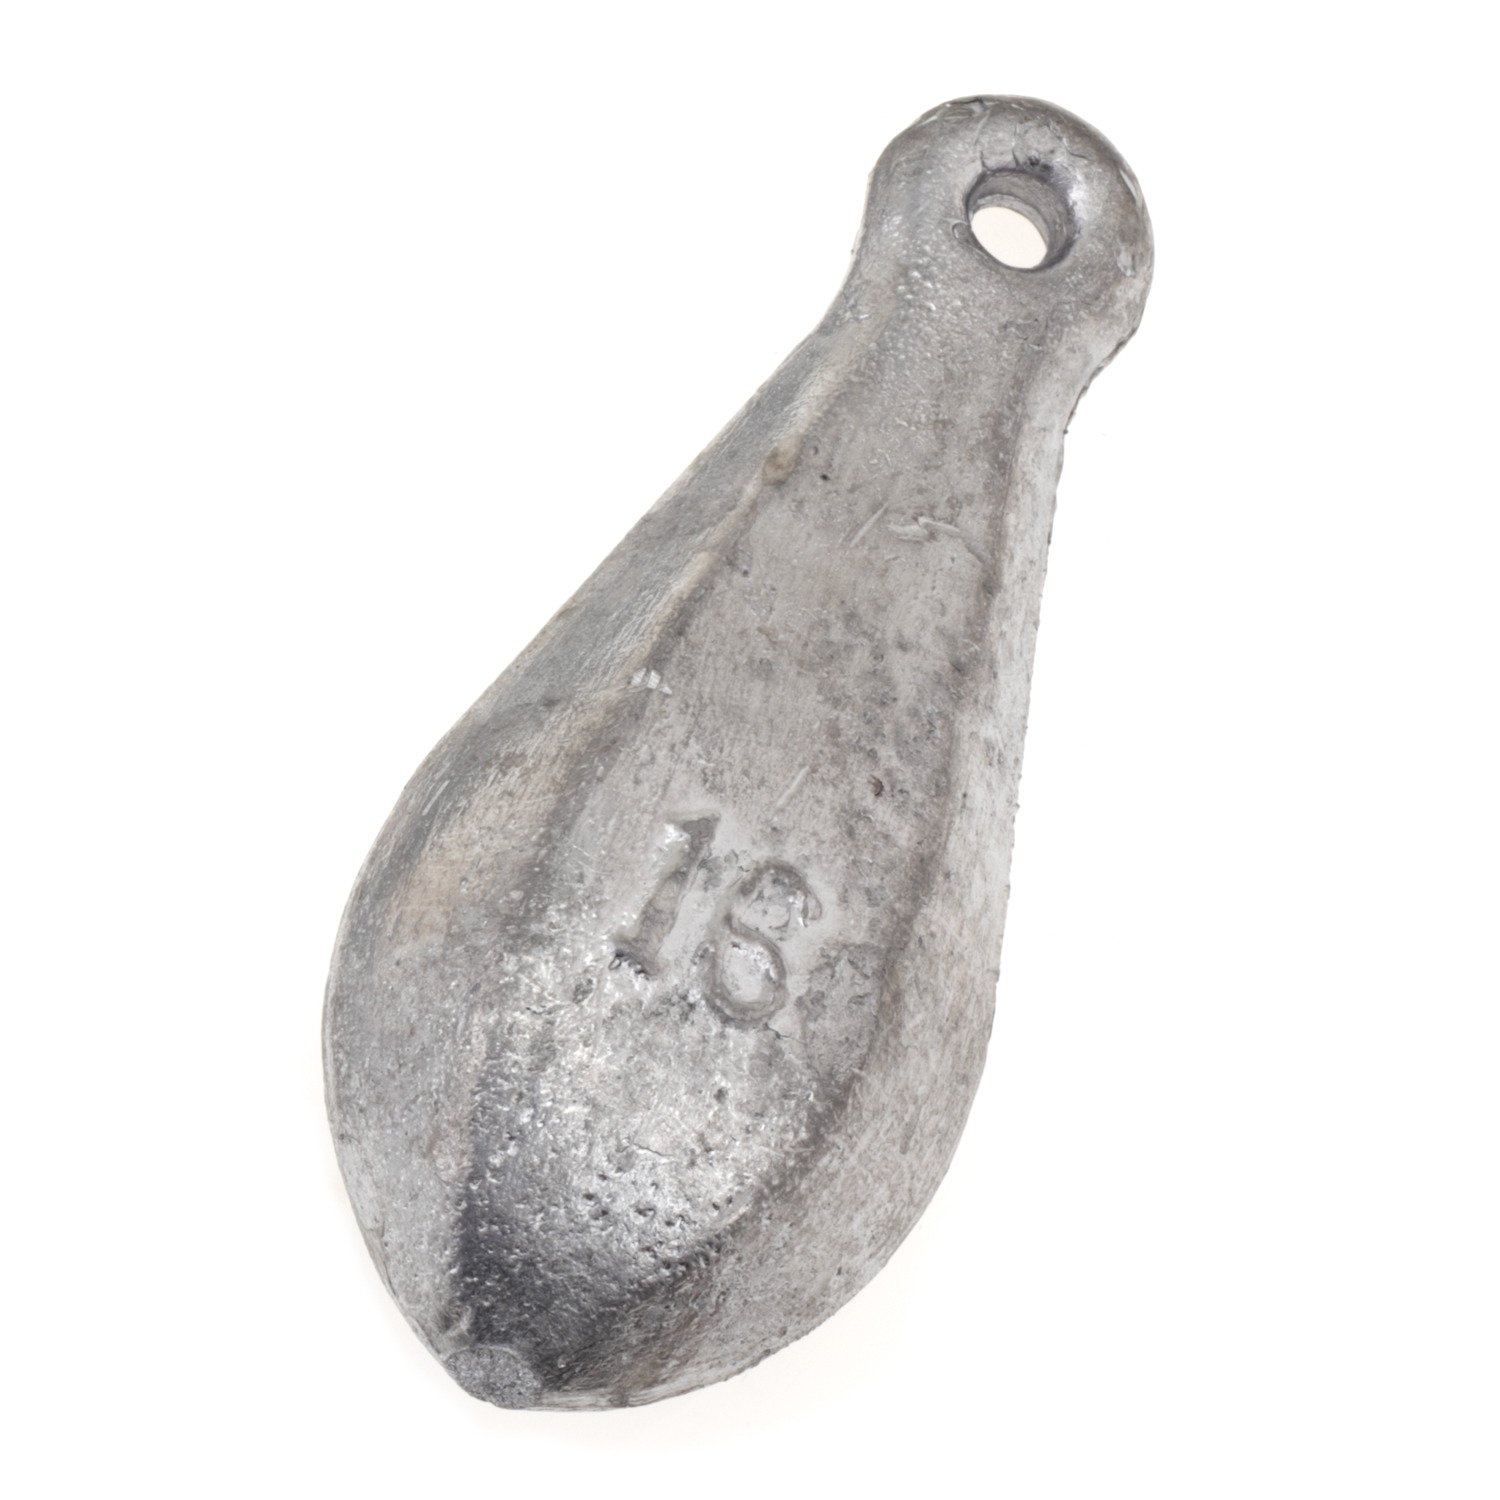 3/8 oz Lead Bank Weights - 10 PER Pack